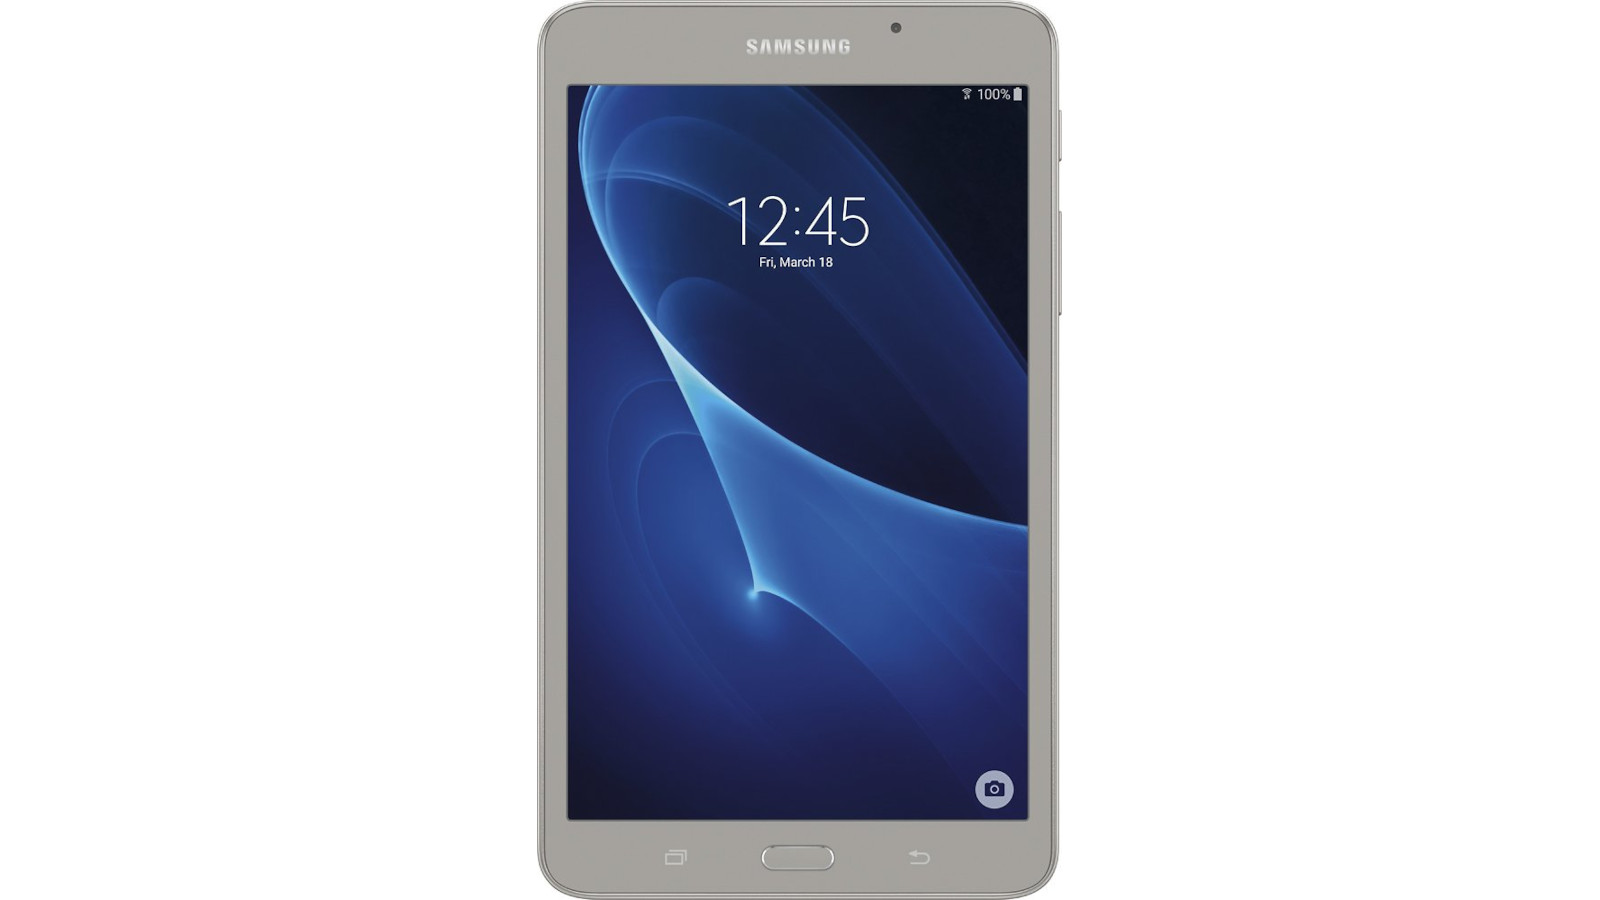 Samsung Galaxy Tab A 7.0 (2016) front view